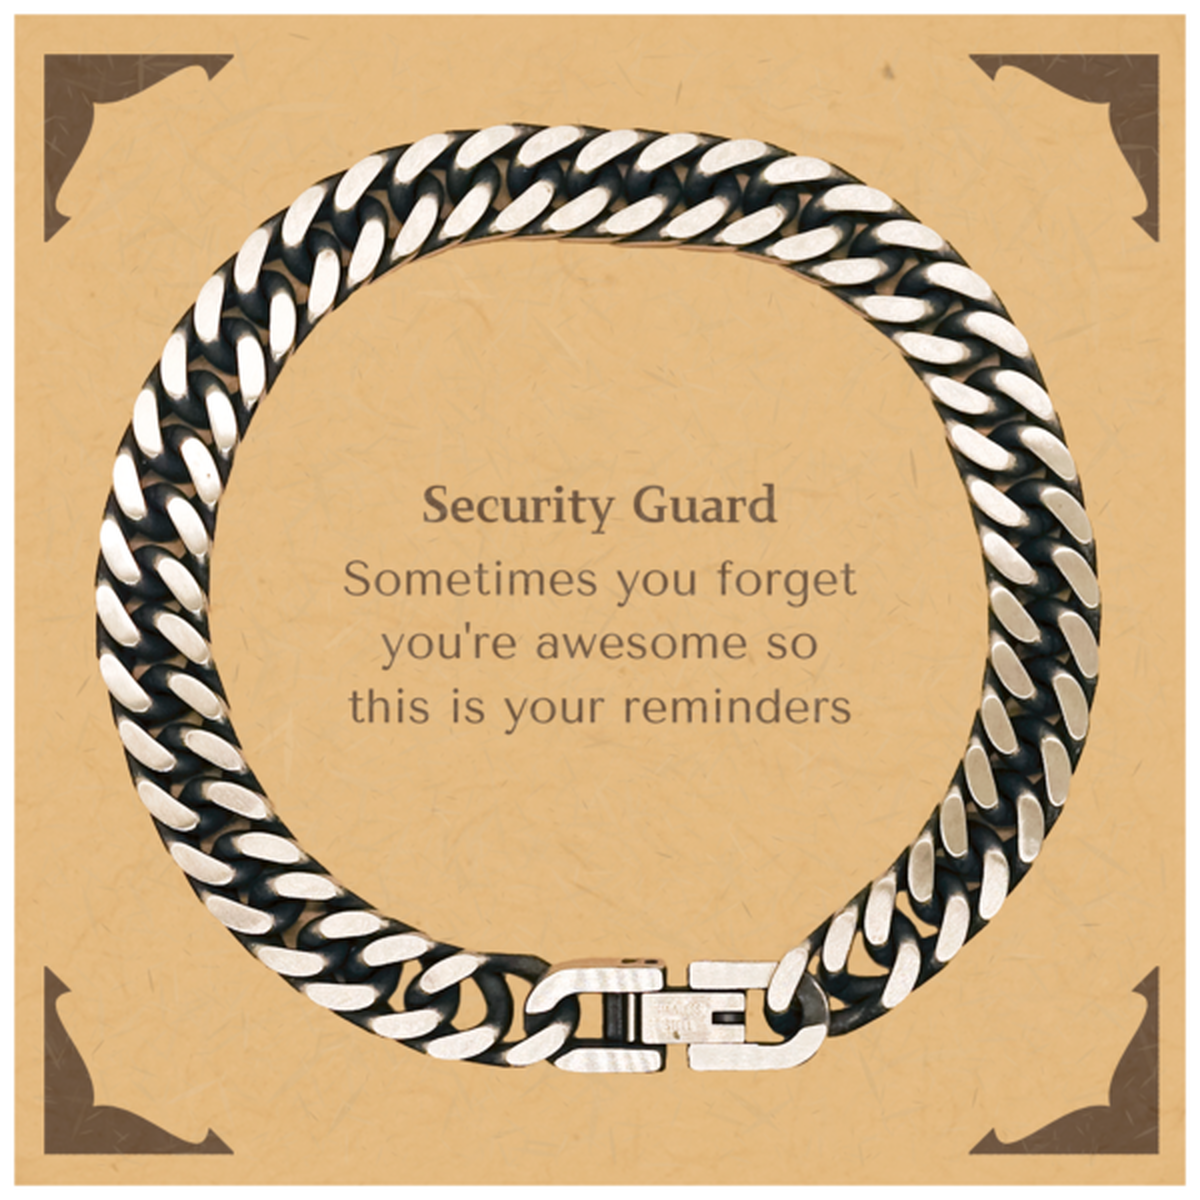 Sentimental Security Guard Cuban Link Chain Bracelet, Security Guard Sometimes you forget you're awesome so this is your reminders, Graduation Christmas Birthday Gifts for Security Guard, Men, Women, Coworkers